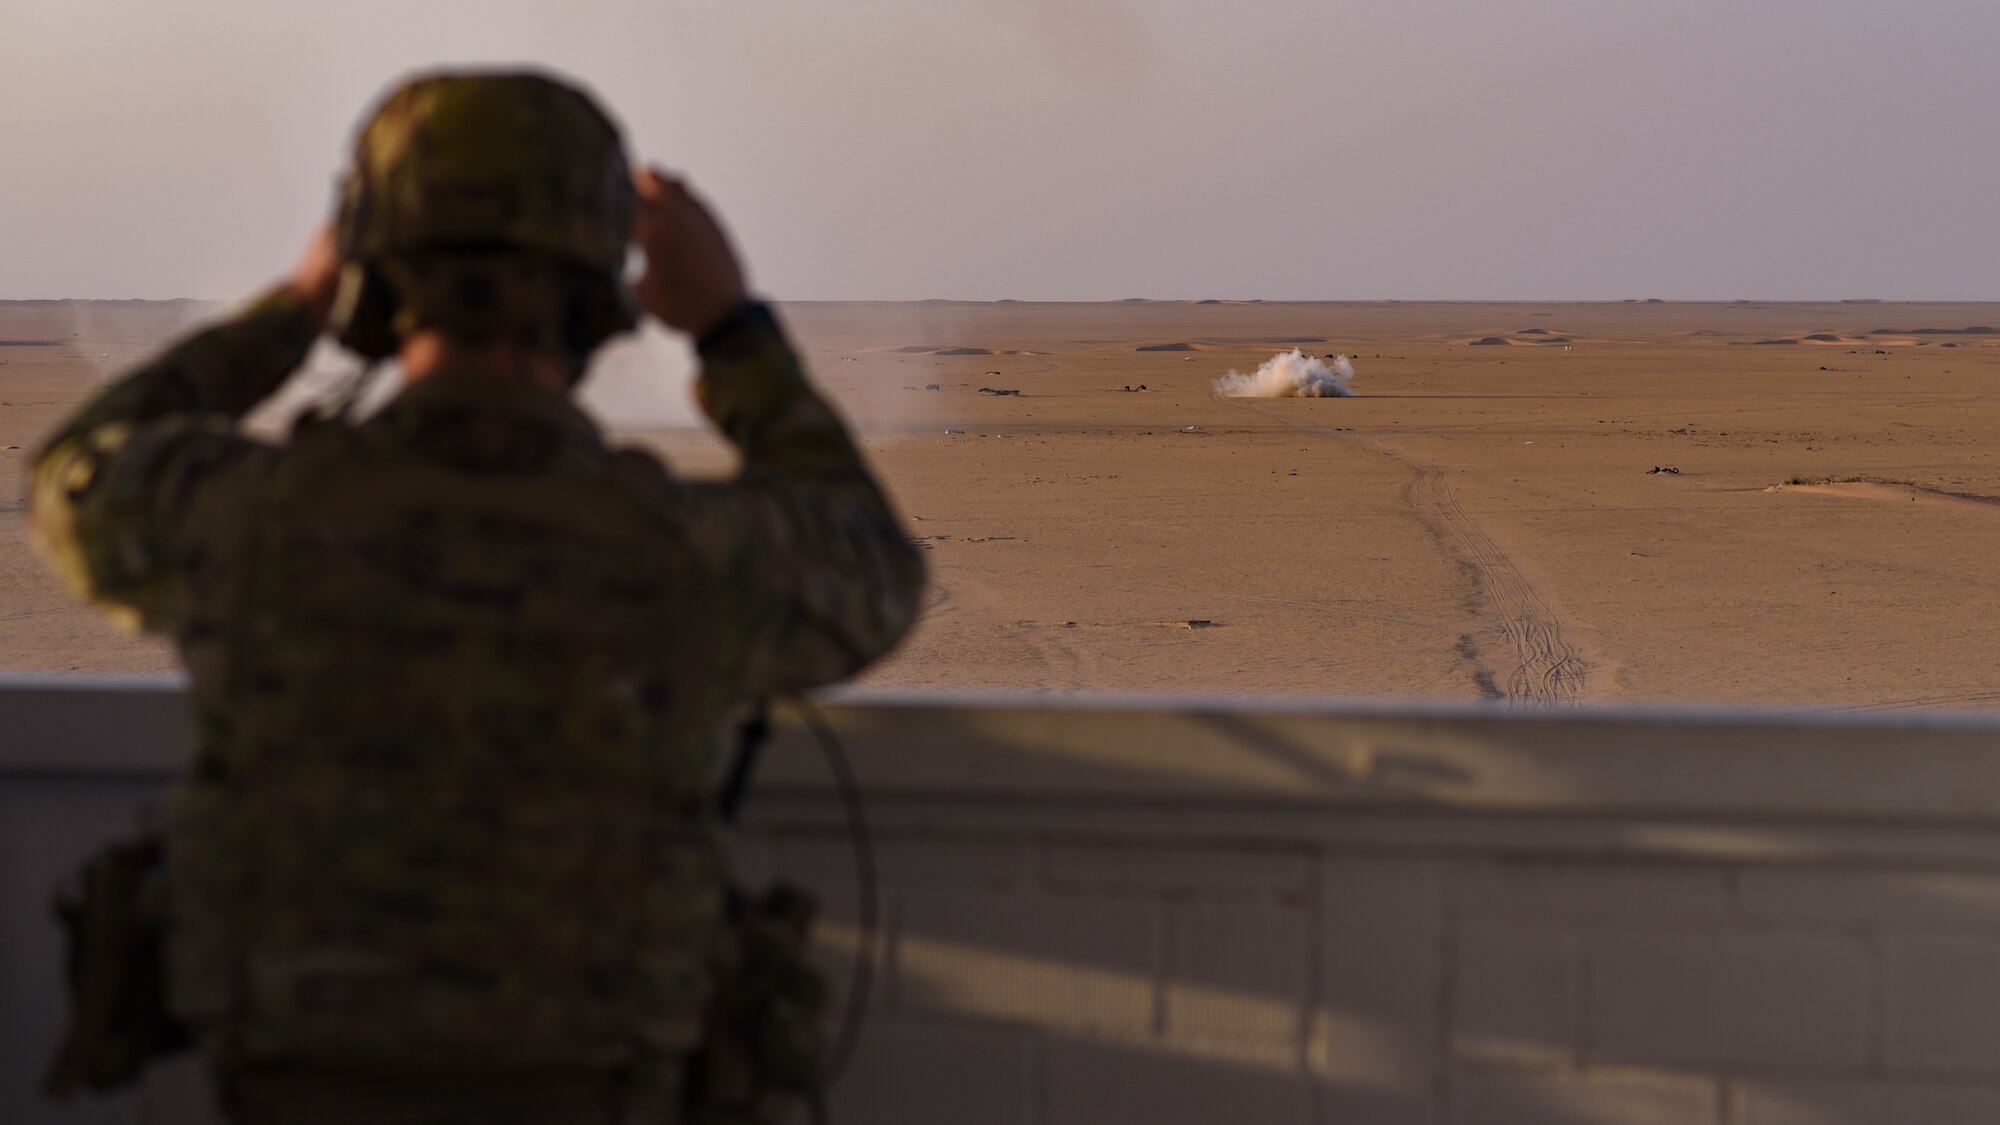 A U.S. Army 1st Battalion 194th Armor Regiment forward observer monitors an airstrike downrange at Udairi Range, Kuwait, Oct. 21, 2021. U.S. Air Force joint terminal attack controllers deployed to the 82nd Expeditionary Air Support Operations Squadron, along with the U.S. Army 1-194 AR joint fires observers in-training, and the Italian air force (Aeronautica Militare) Task Group Typhoon practiced close air support, fostered enduring partnerships and advanced its decisive combat dominance during a live-fire training exercise. (U.S. Air Force photo by Staff Sgt. Ryan Brooks)